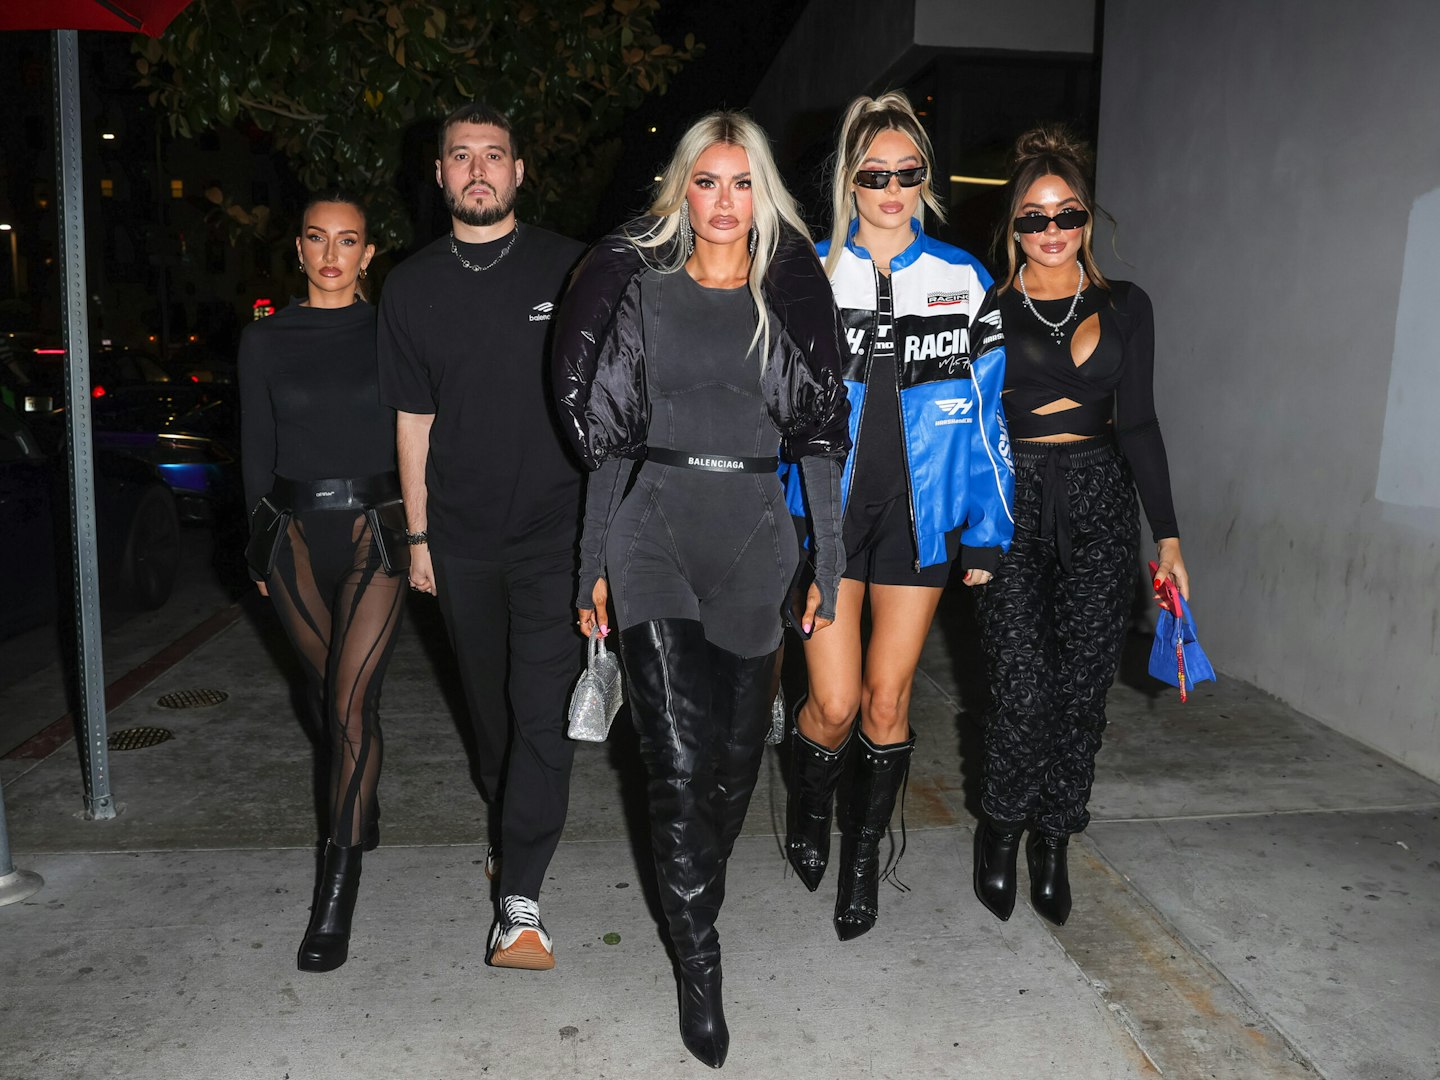 Georgia Shults, Charlie Sims, Chloe Sims, Demi Sims and Frankie Sims in LA in 2022